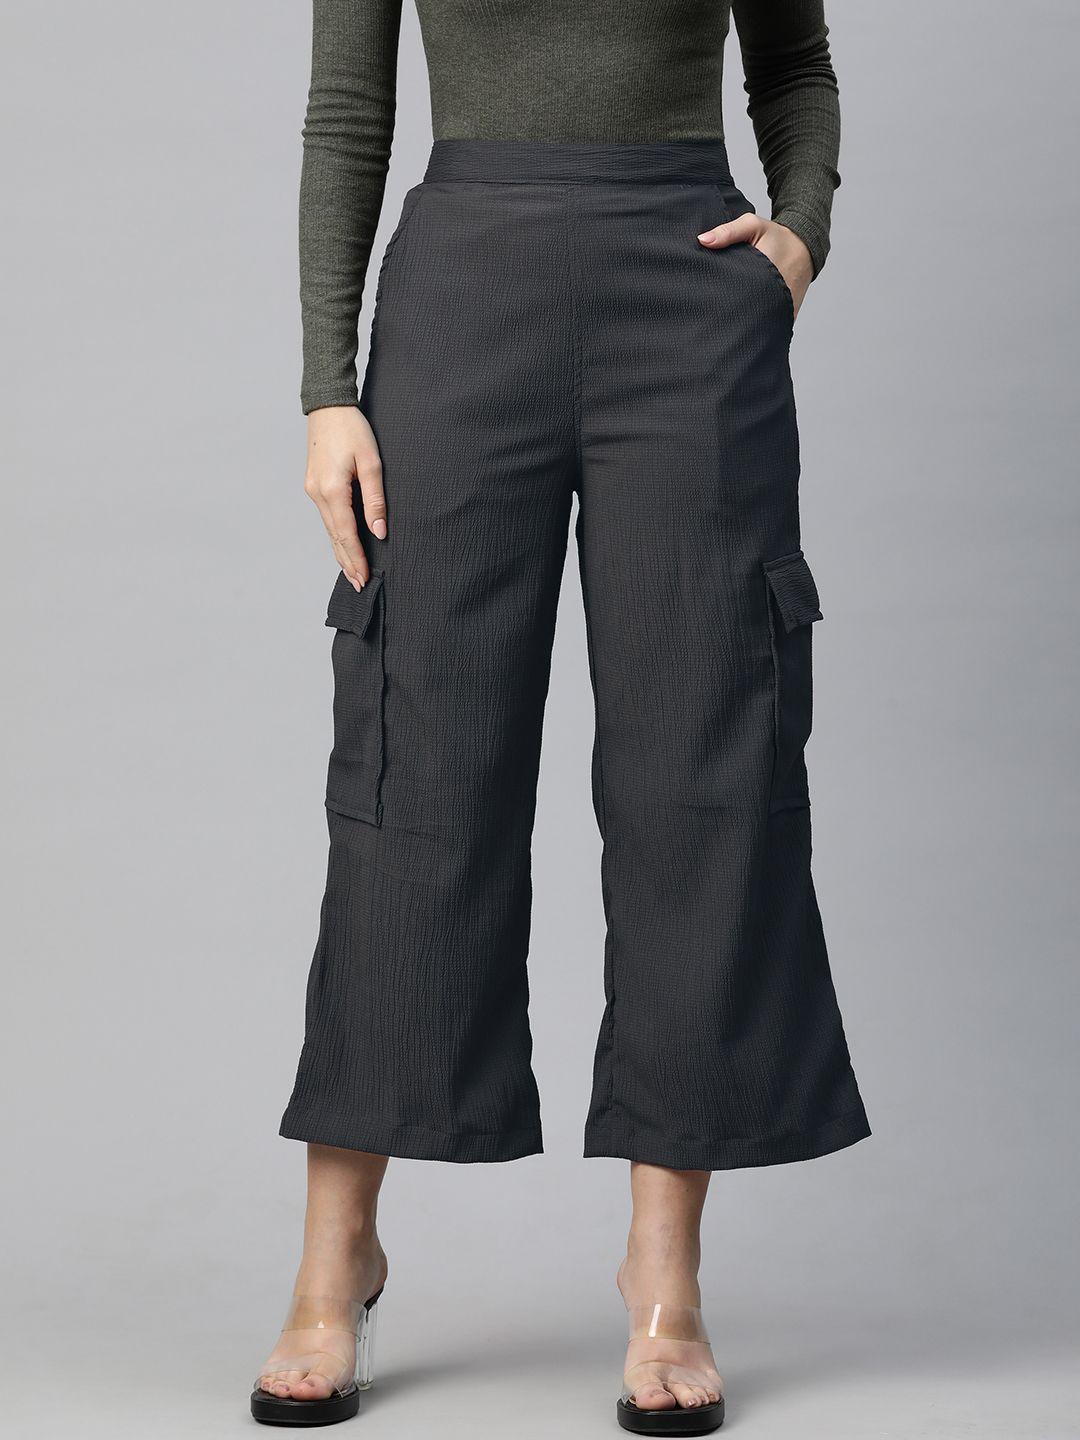 readiprint fashions flared cropped cargo trousers